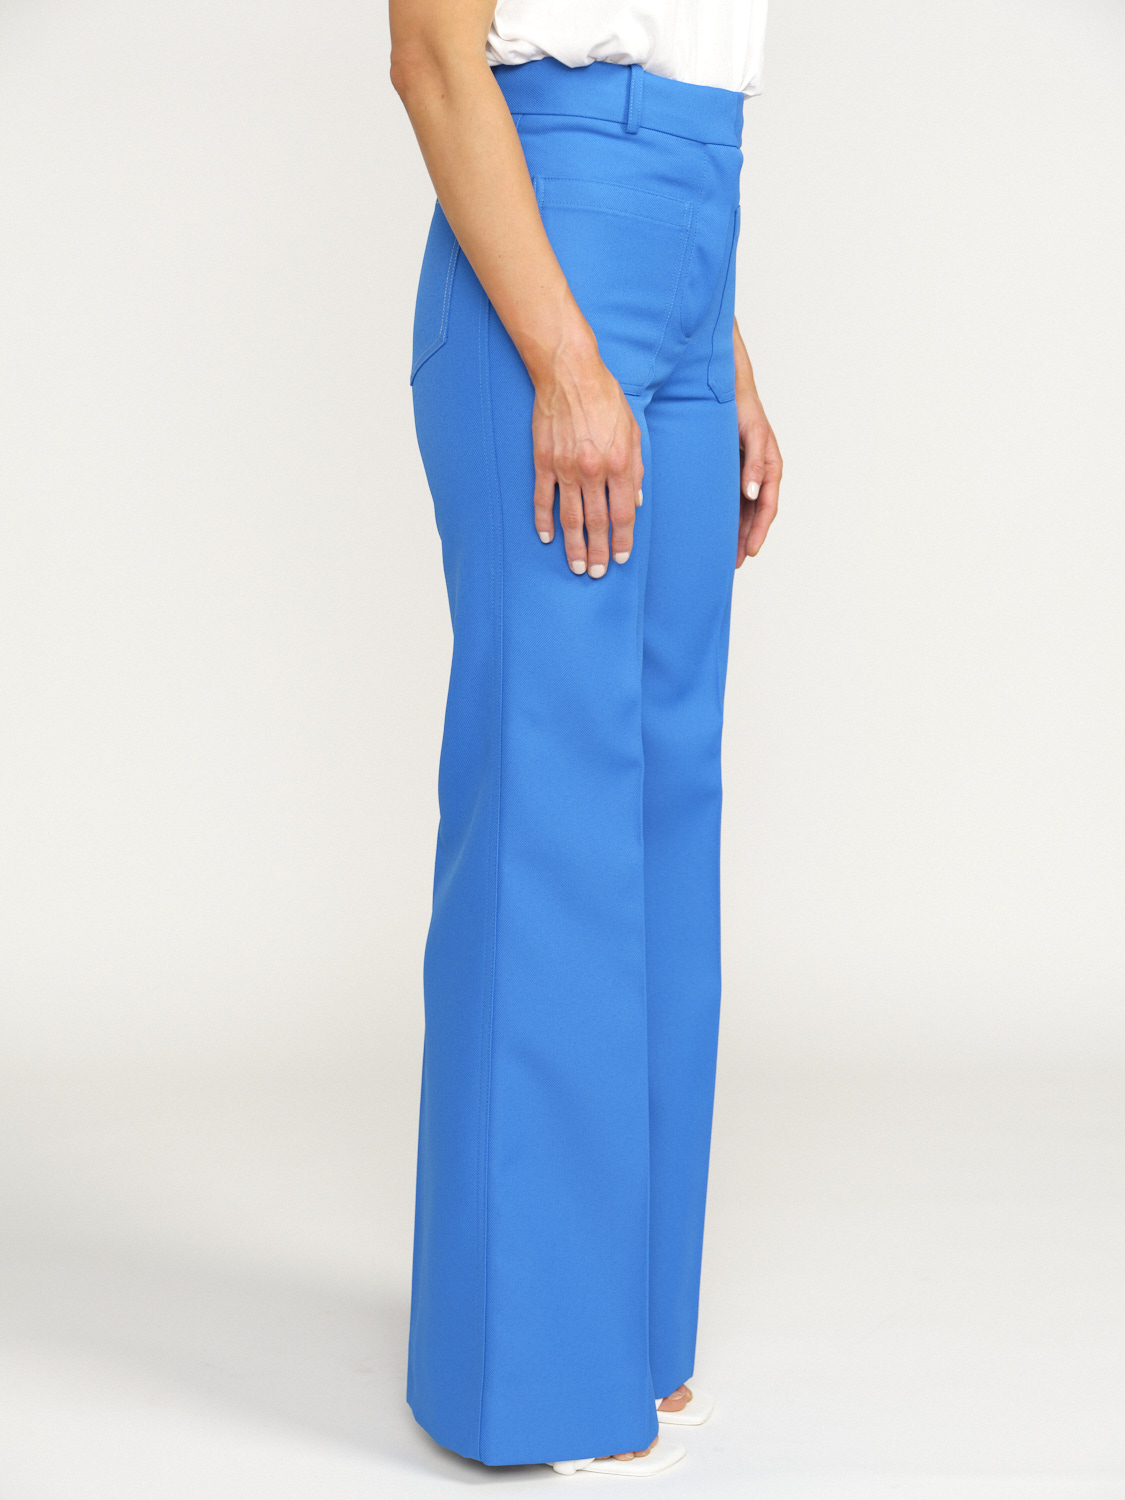 Victoria Beckham Alina Tailored Trousers - Trousers with patch pockets with wide leg blue 38